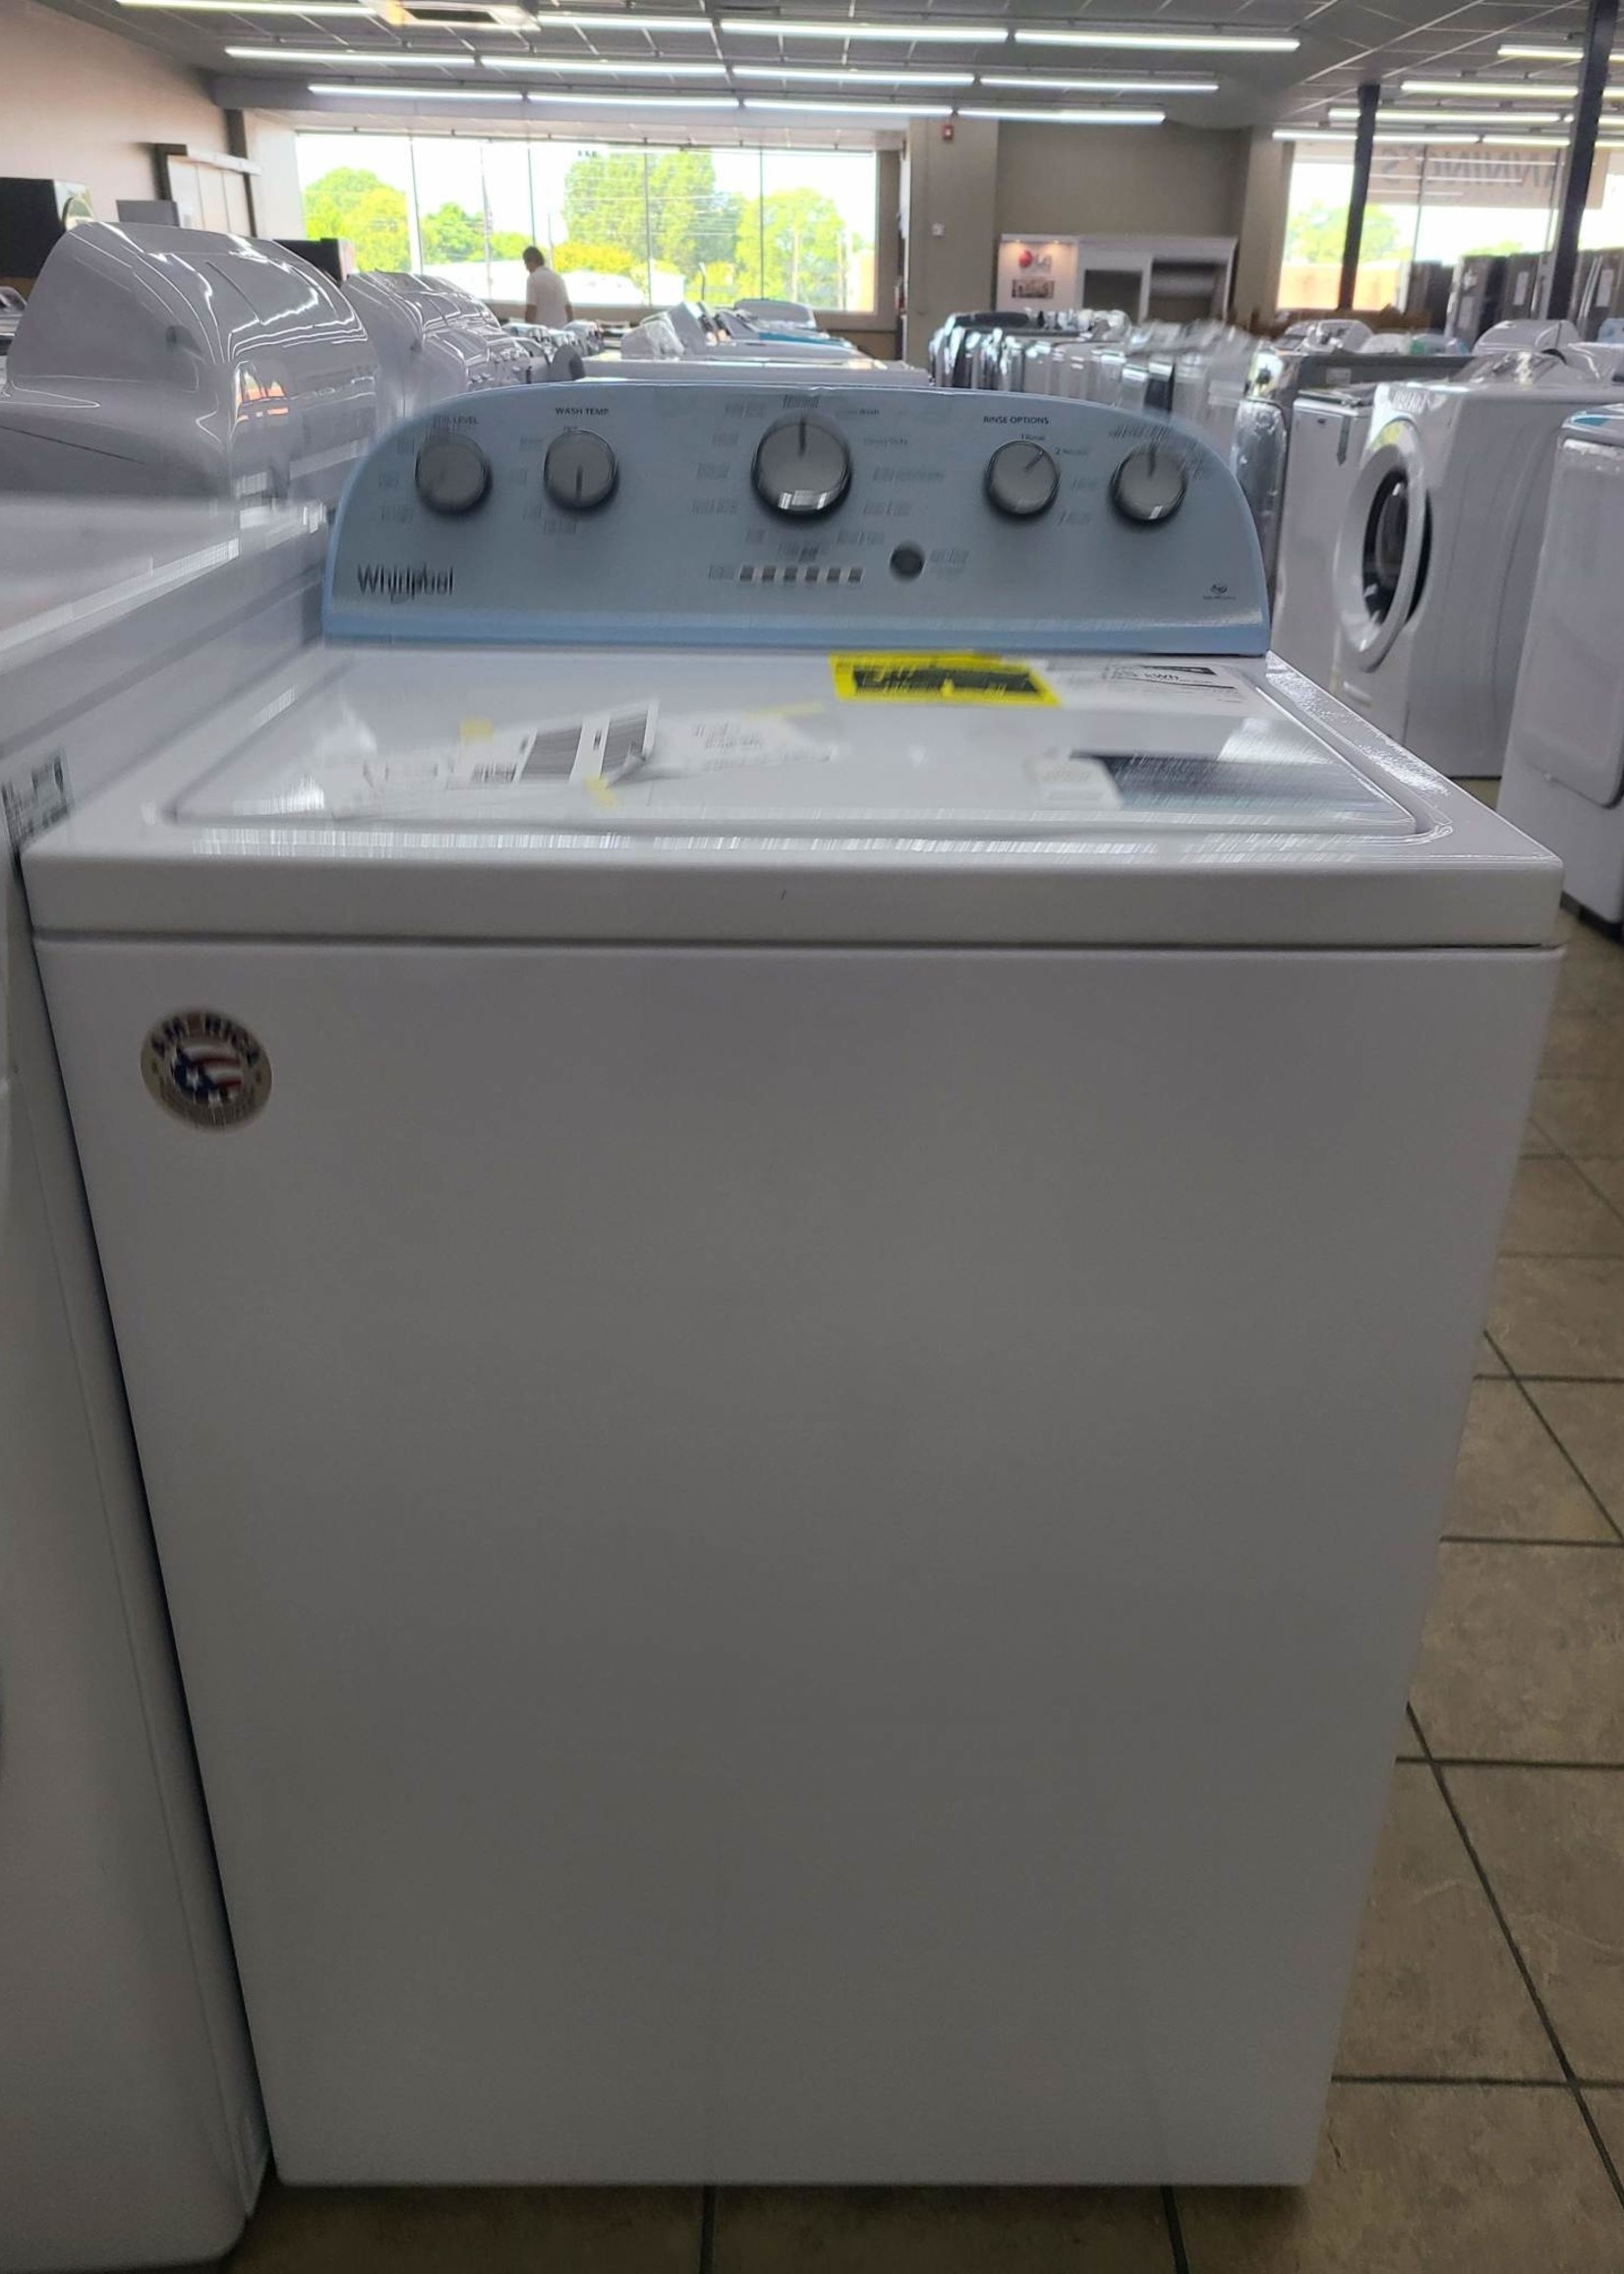 Whirlpool *Whirlpool  WTW4816FW   3.5-cu ft High Efficiency Top-Load Washer In White